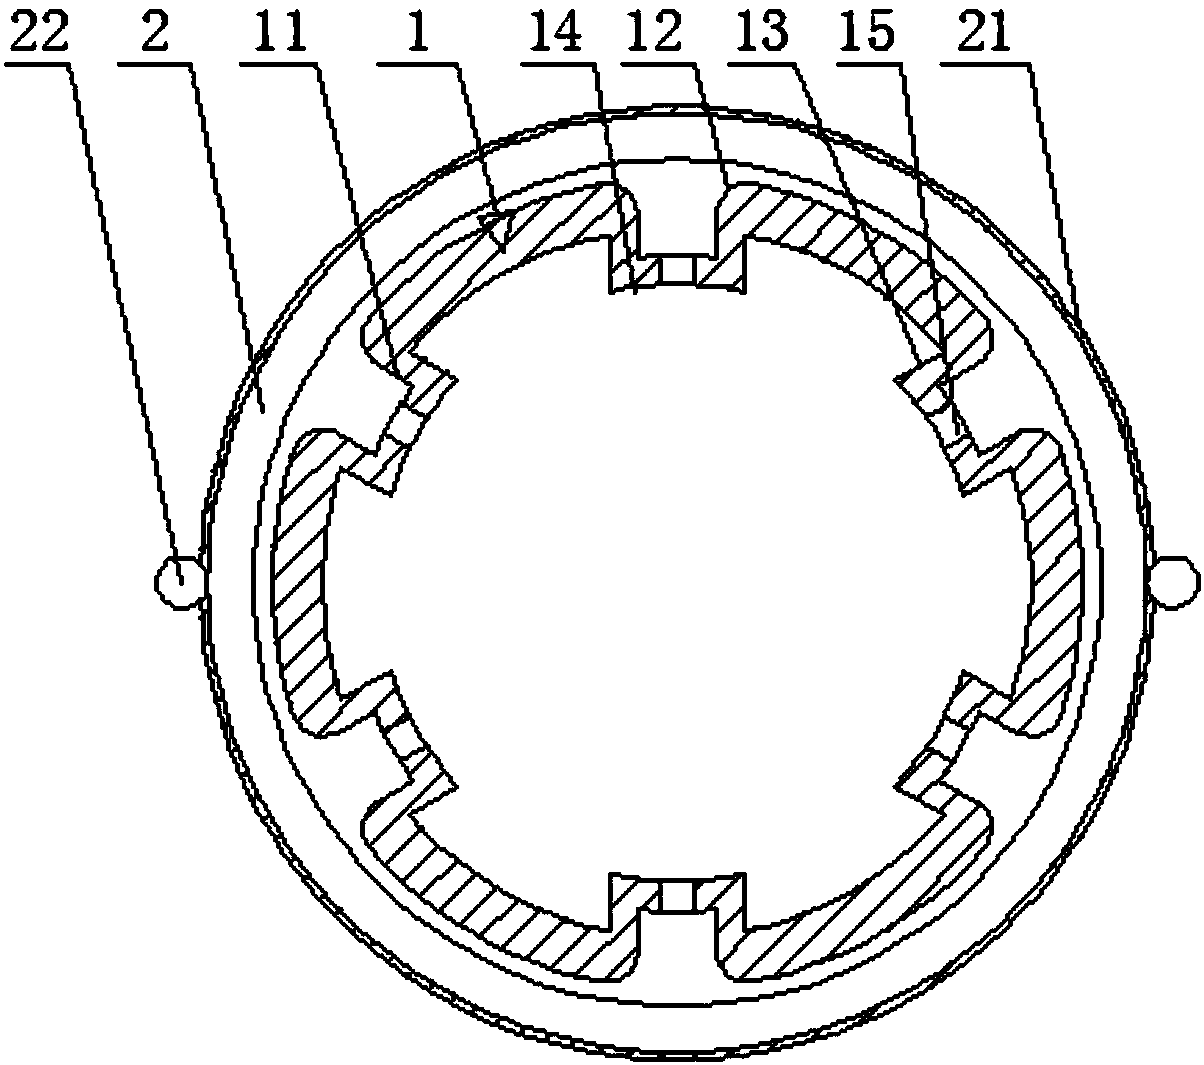 Voice coil for soundbox with radiating function